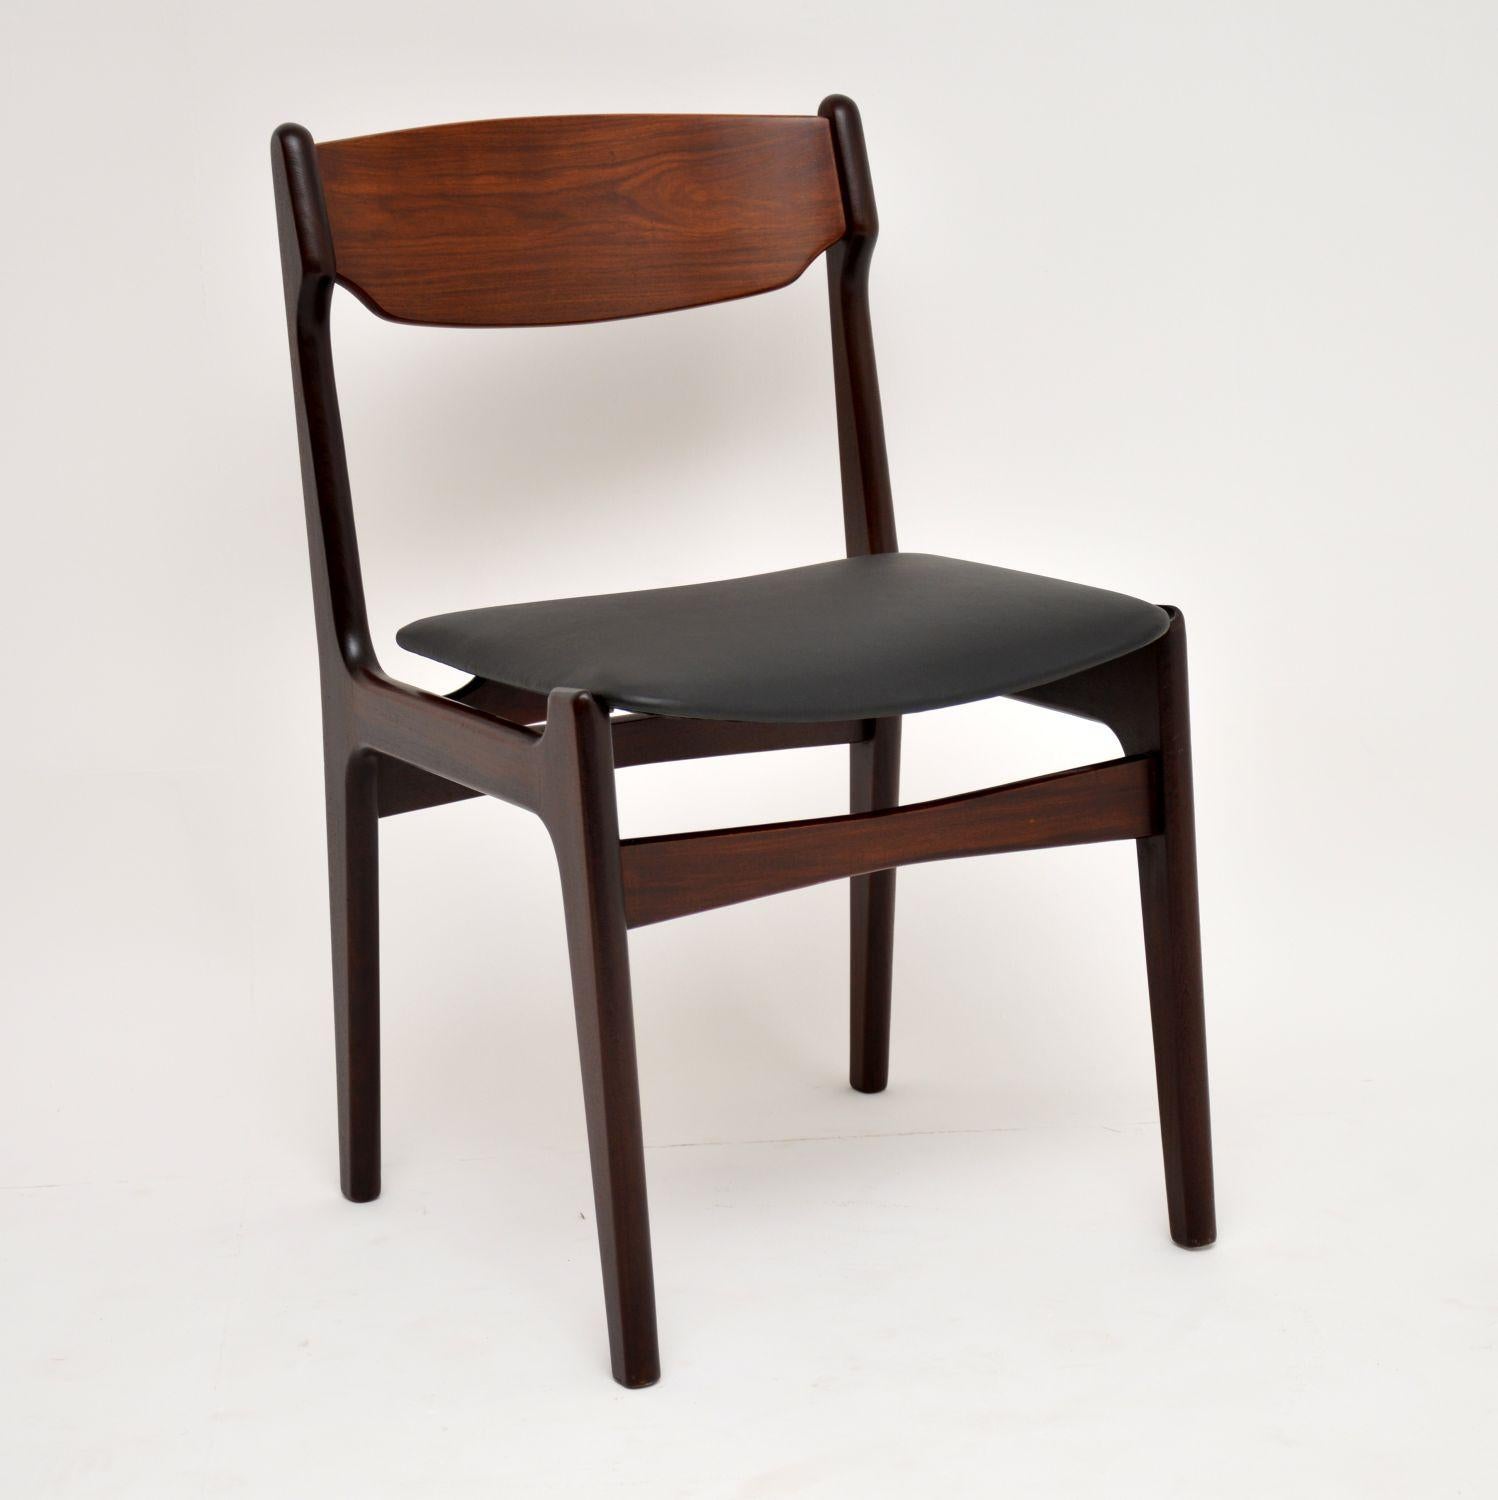 A stylish and extremely high quality set of six dining chairs, these were made in Denmark in the 1960s. The frames are solid wood and the seats have been newly upholstered in black vinyl. We have had the frames stripped and re-polished to a very